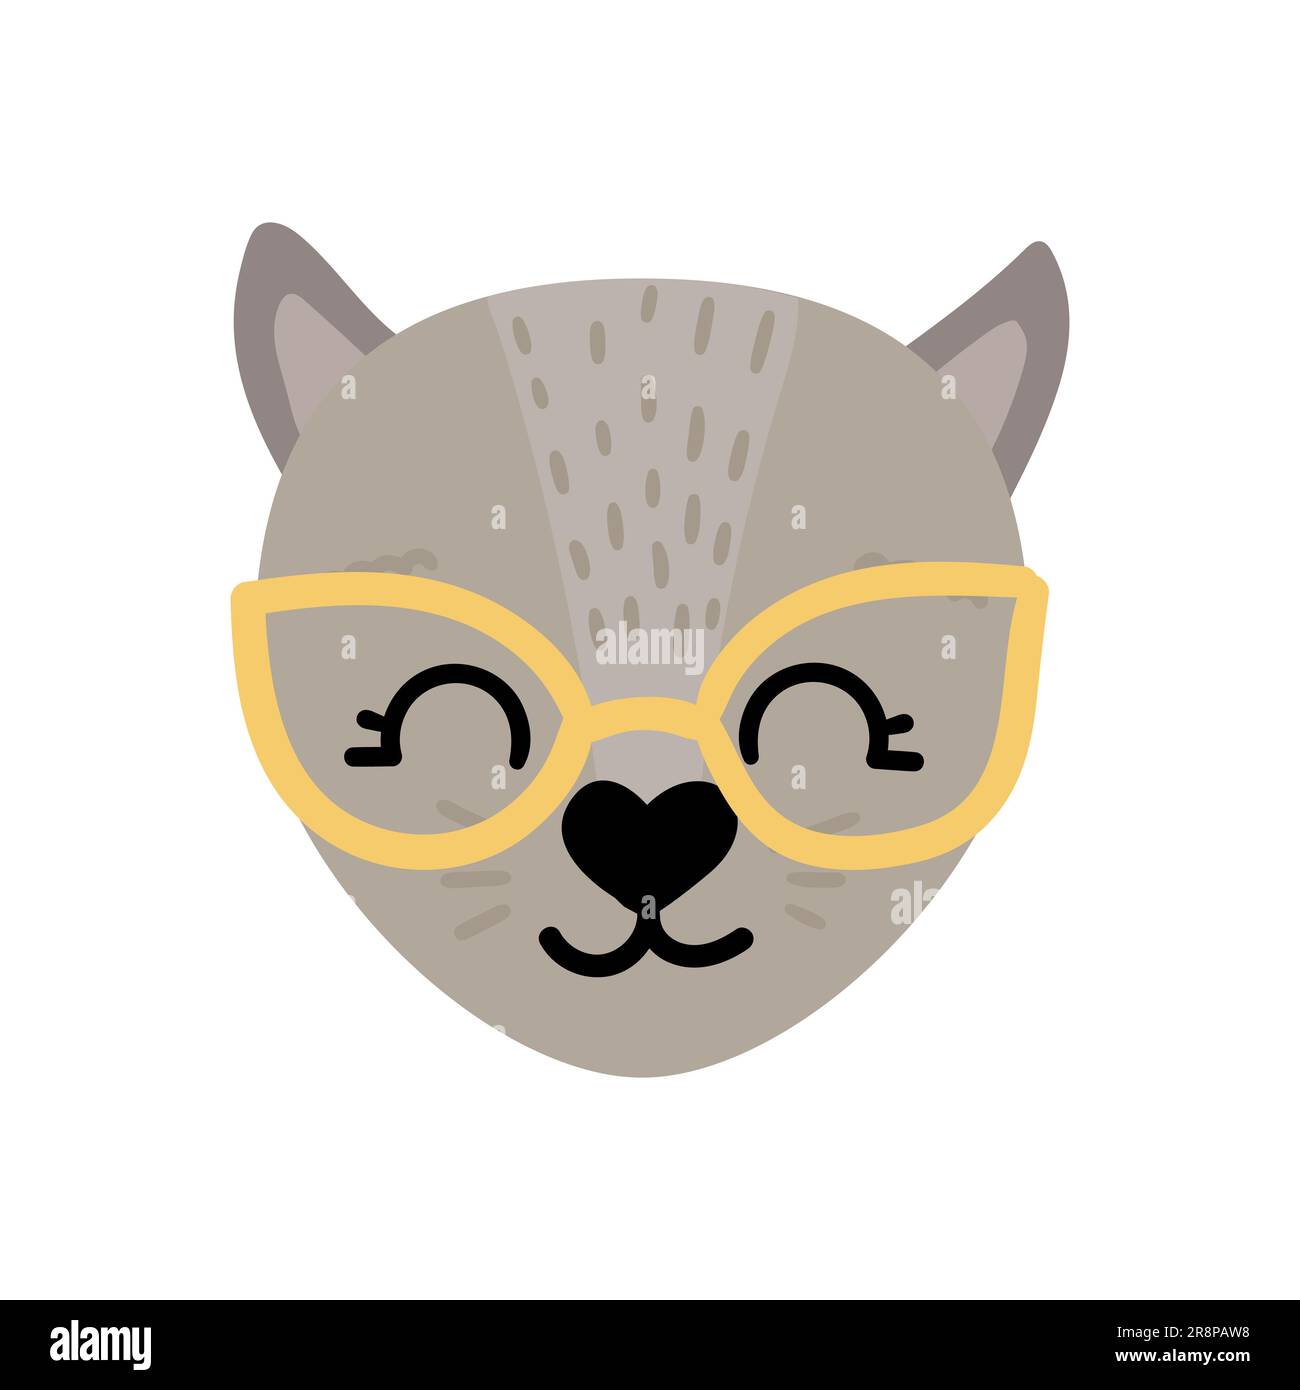 Cute hand drawn cat. Colored animal s face with nice elements, whiskers, eyes in sunglasses. Vectir illustration isolated on white Stock Vector